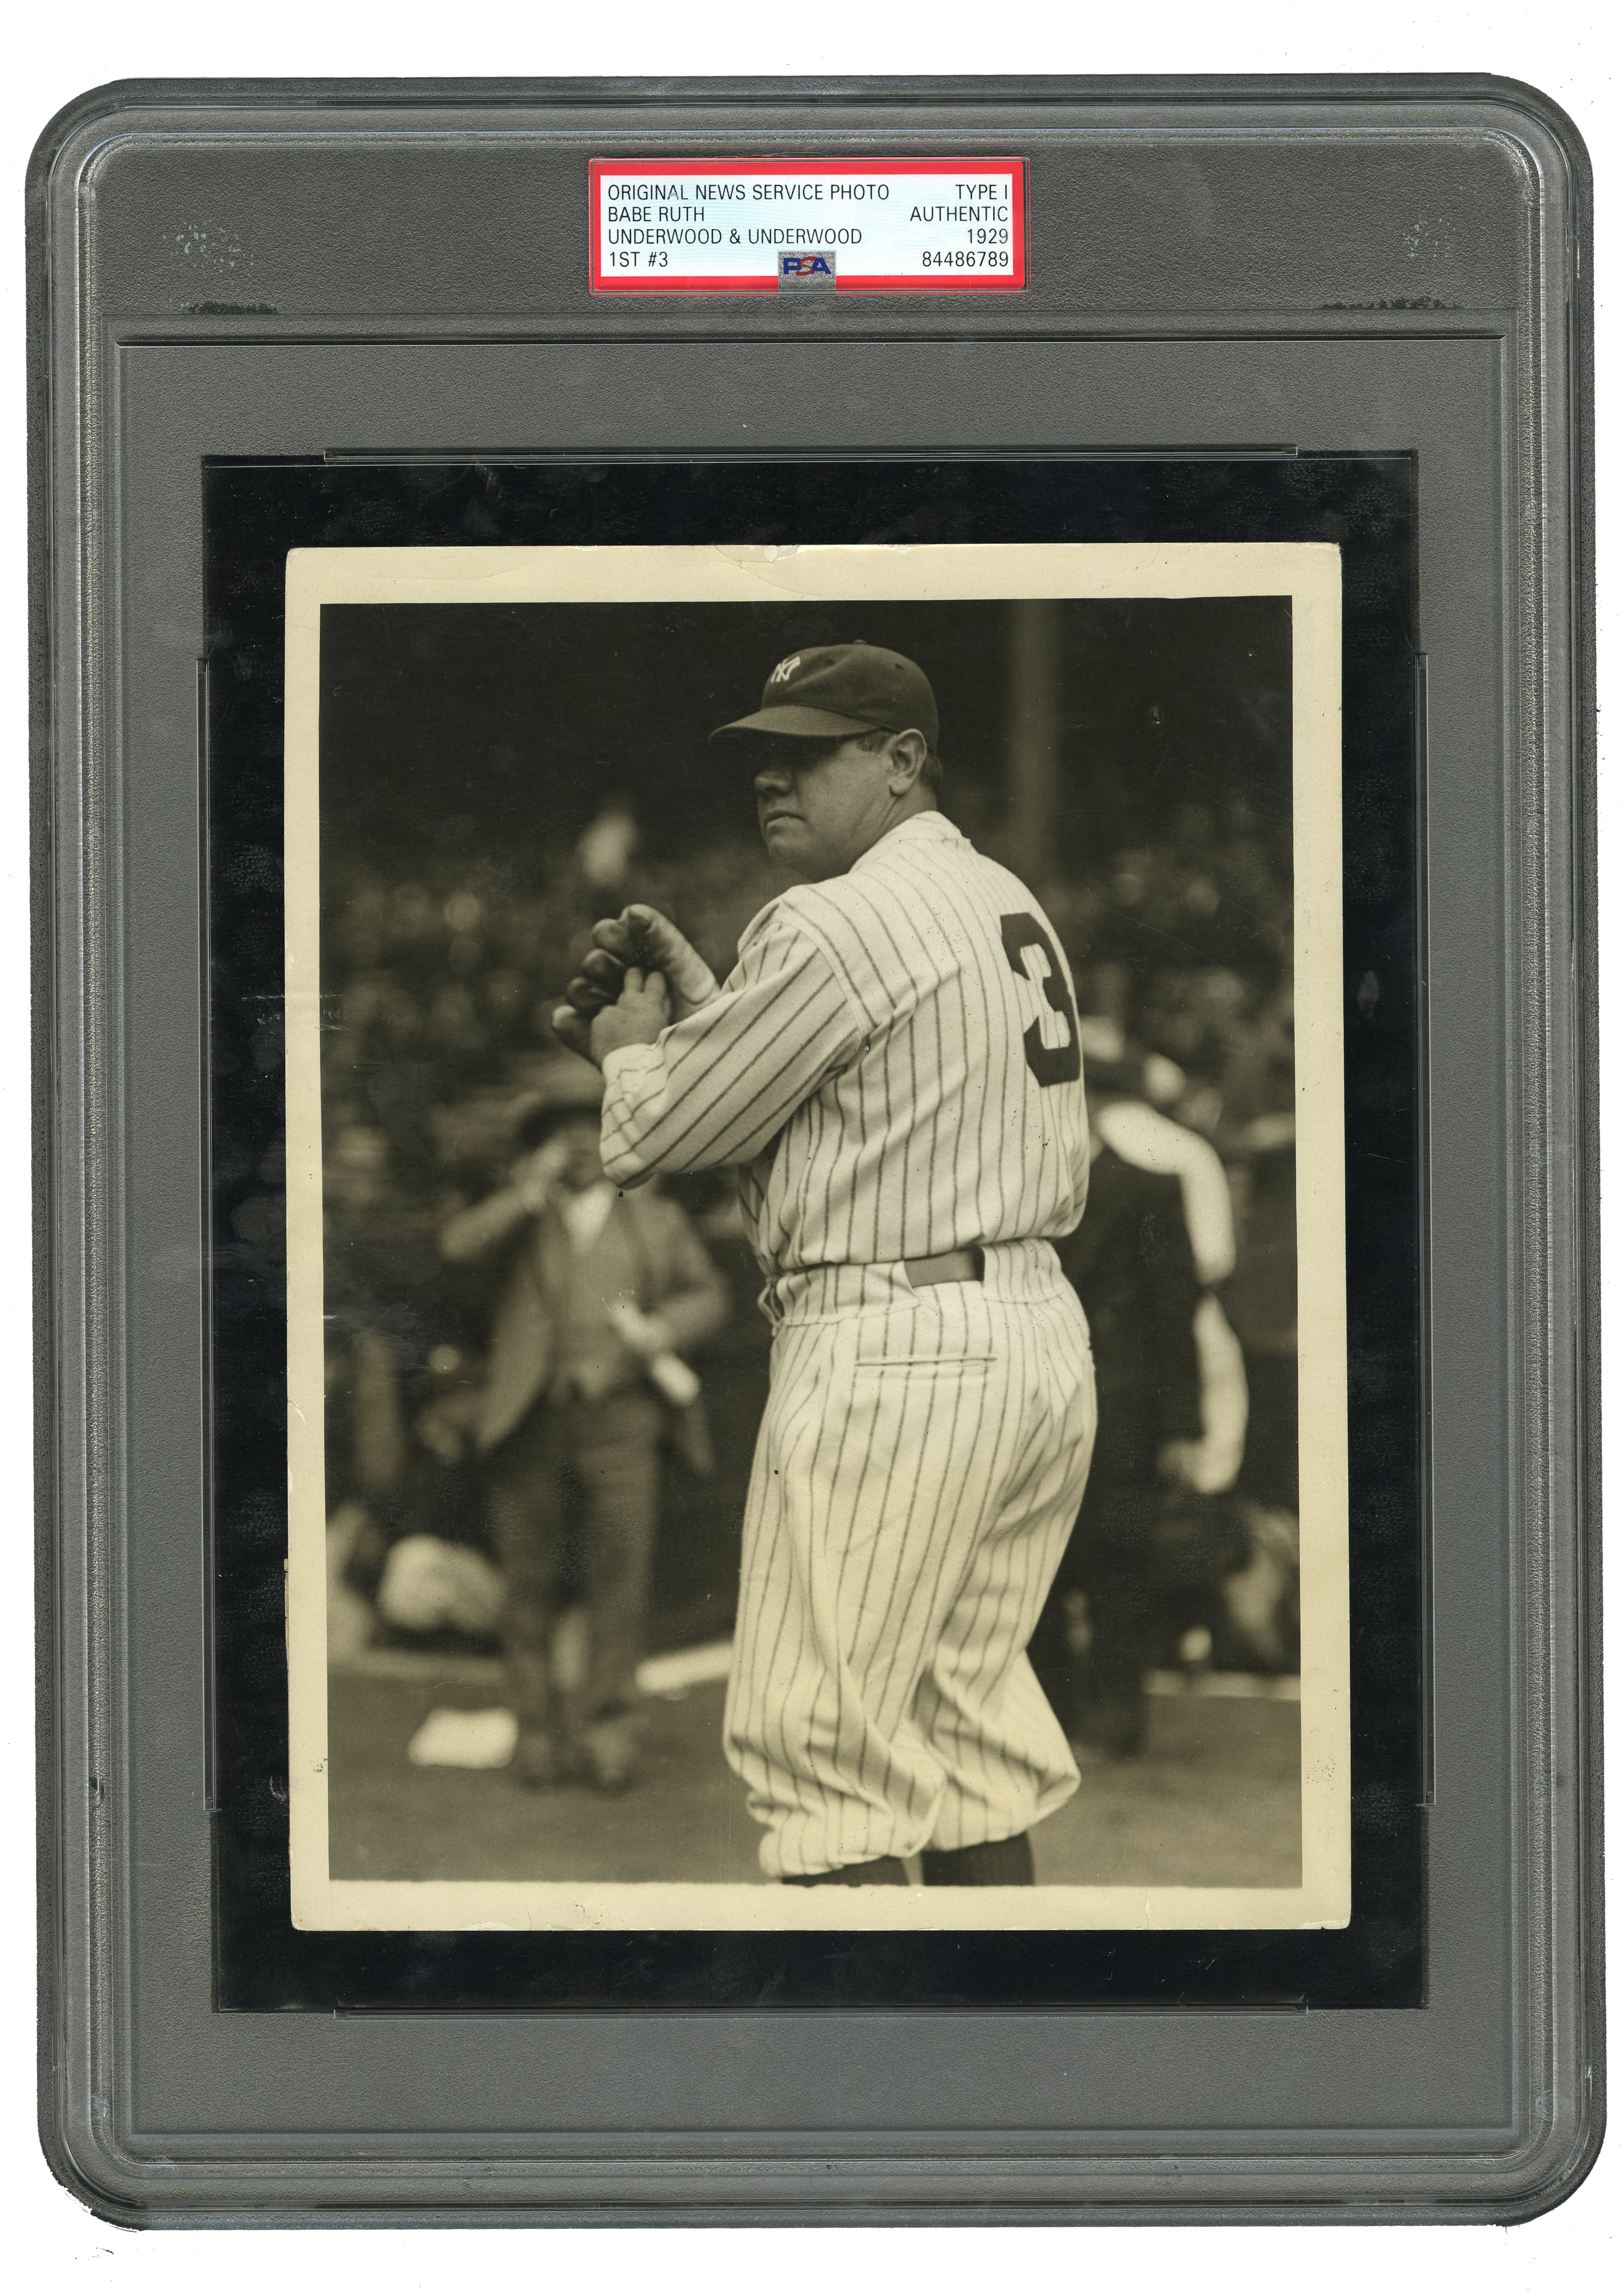 Signed Babe Ruth baseball, other Bambino belongings up for auction